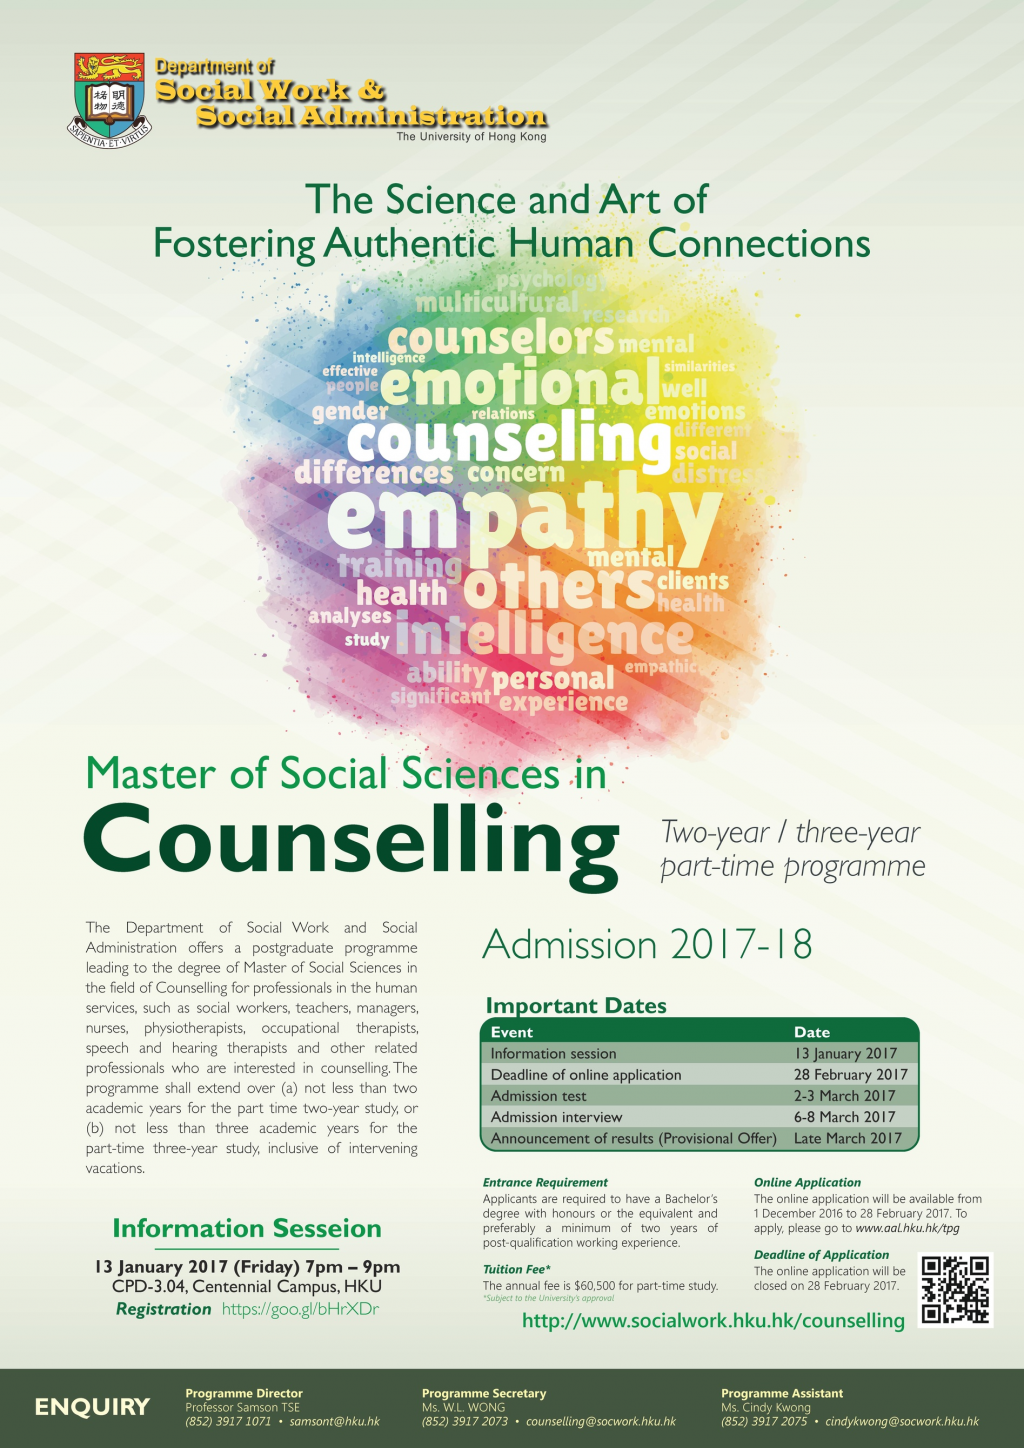 Information Session of Master of Social Sciences in Counselling Programme